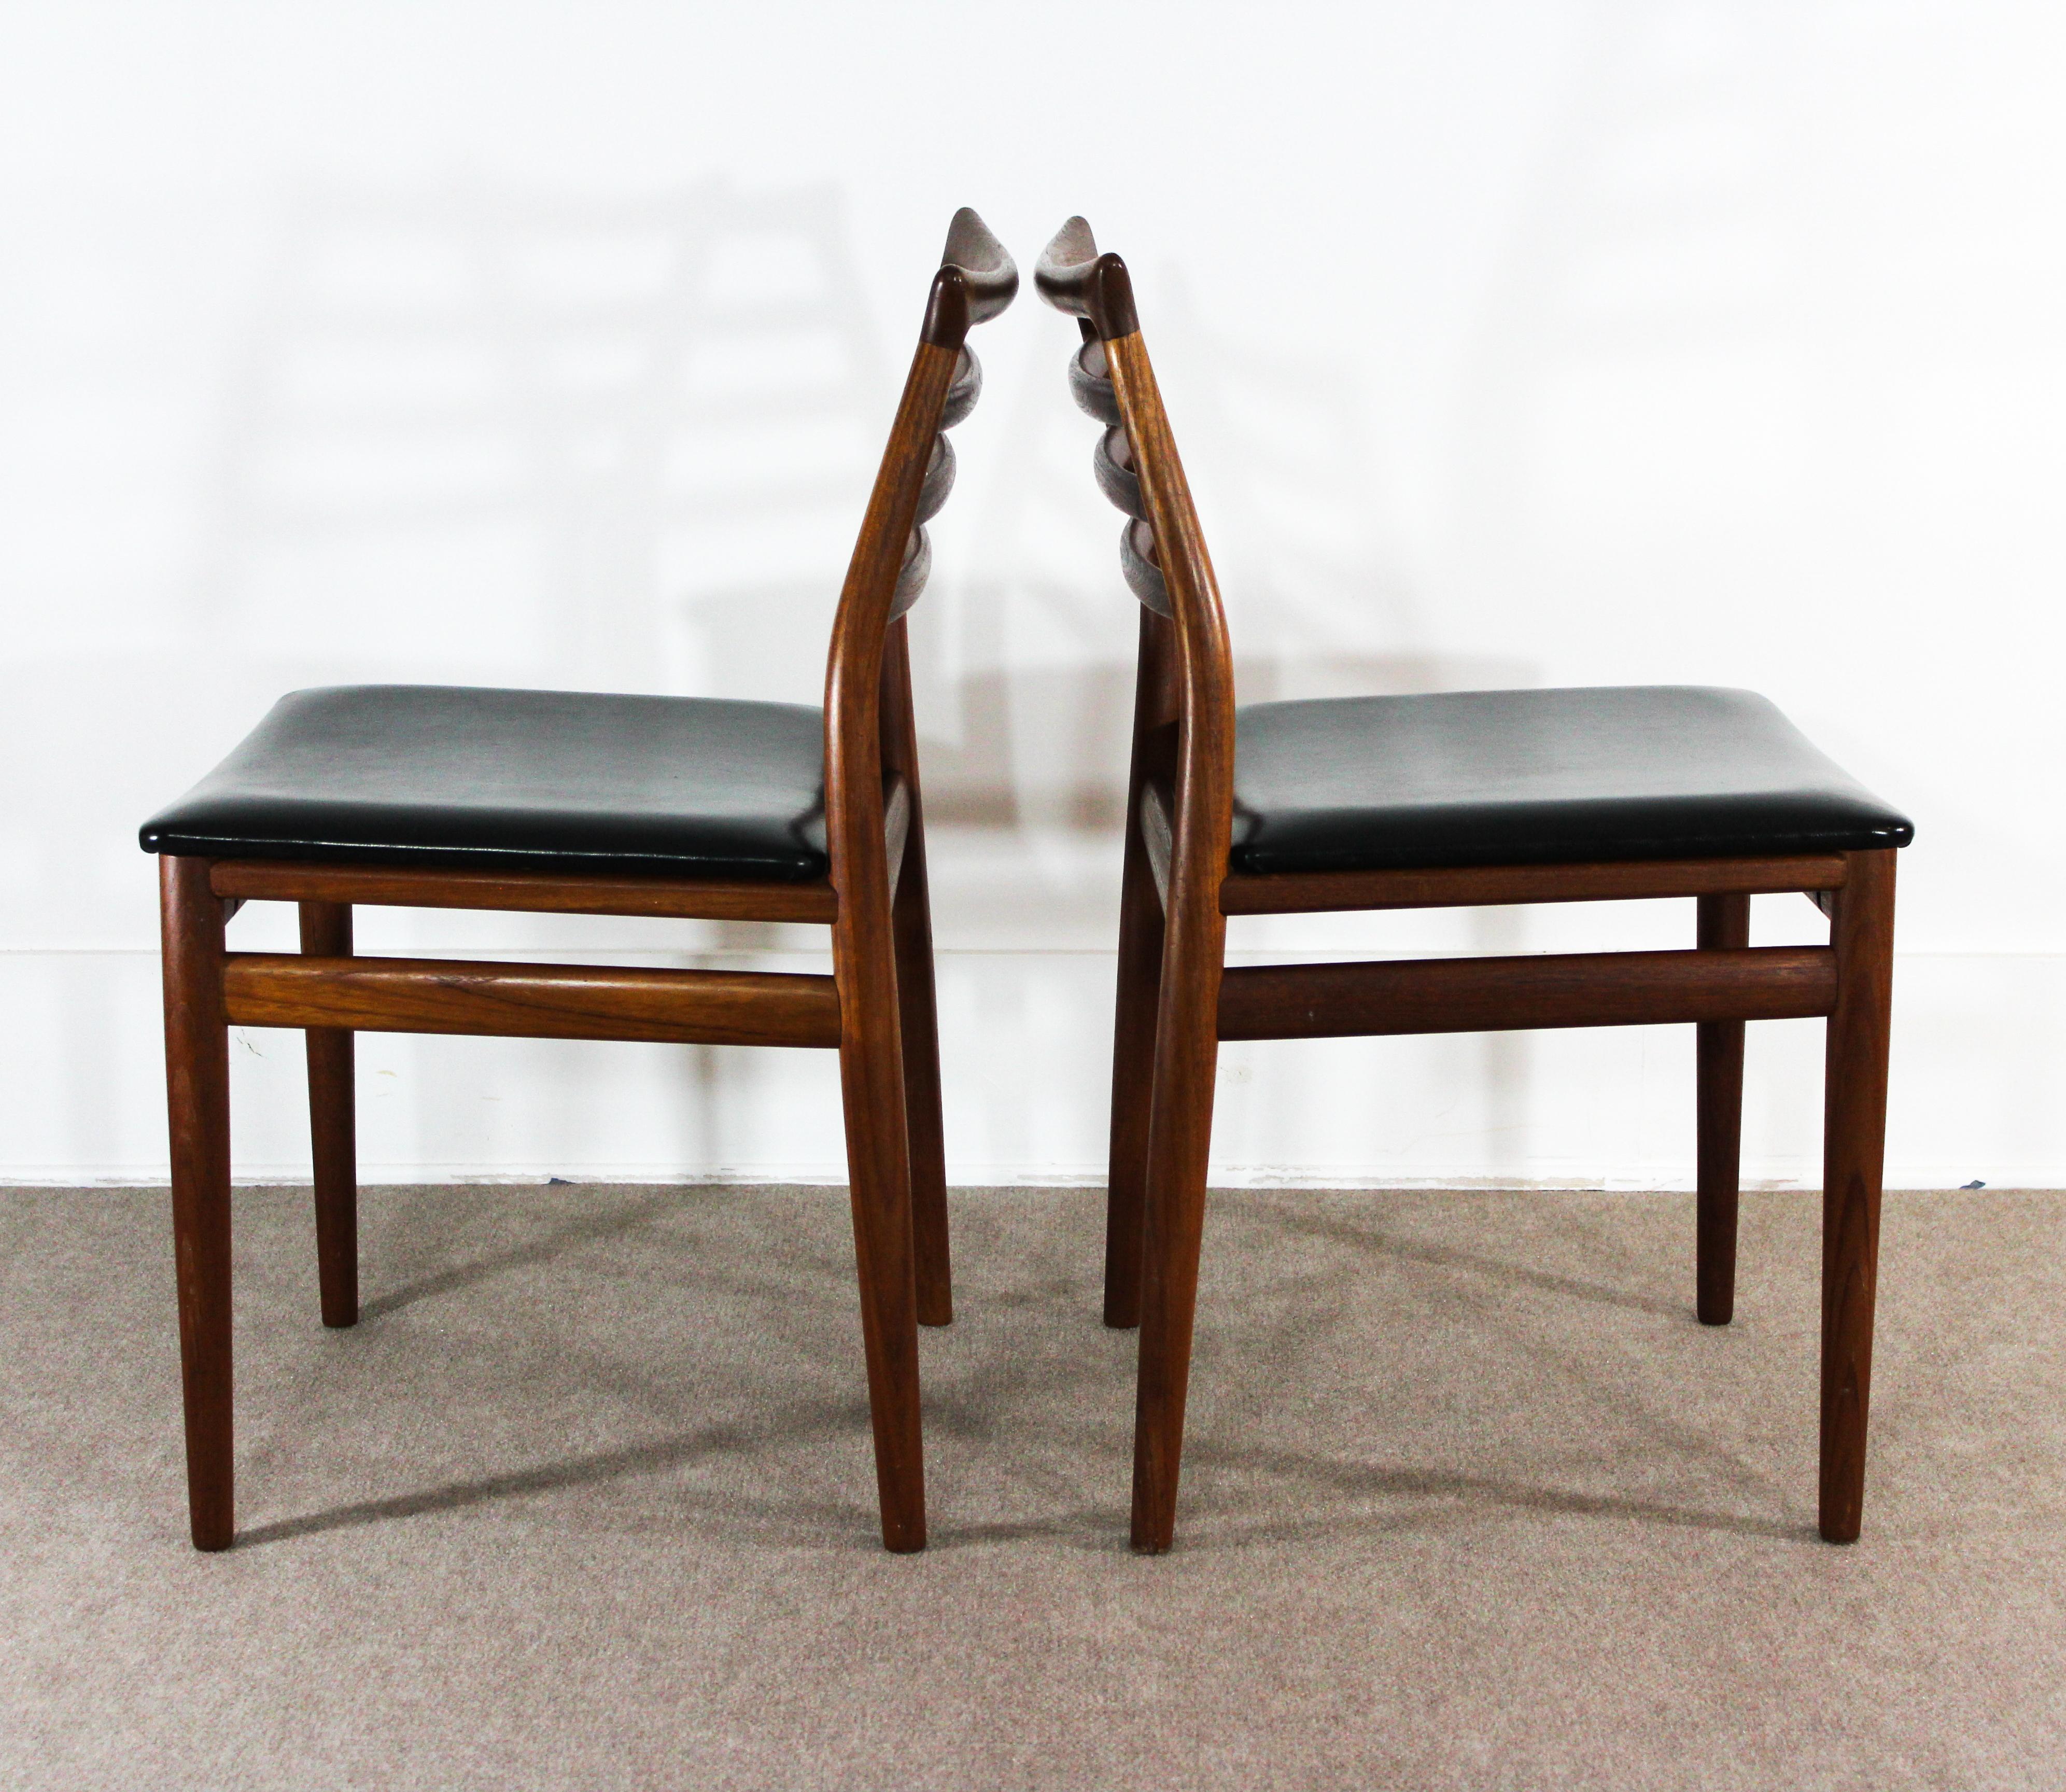 A pair of teak dining chairs designed by Erling Torvits and manufactured at the Danish carpentry Sorø Stolefabrik. Excellent design and quality. These chairs are in excellent vintage condition with original upholstery with minor signs of usage.